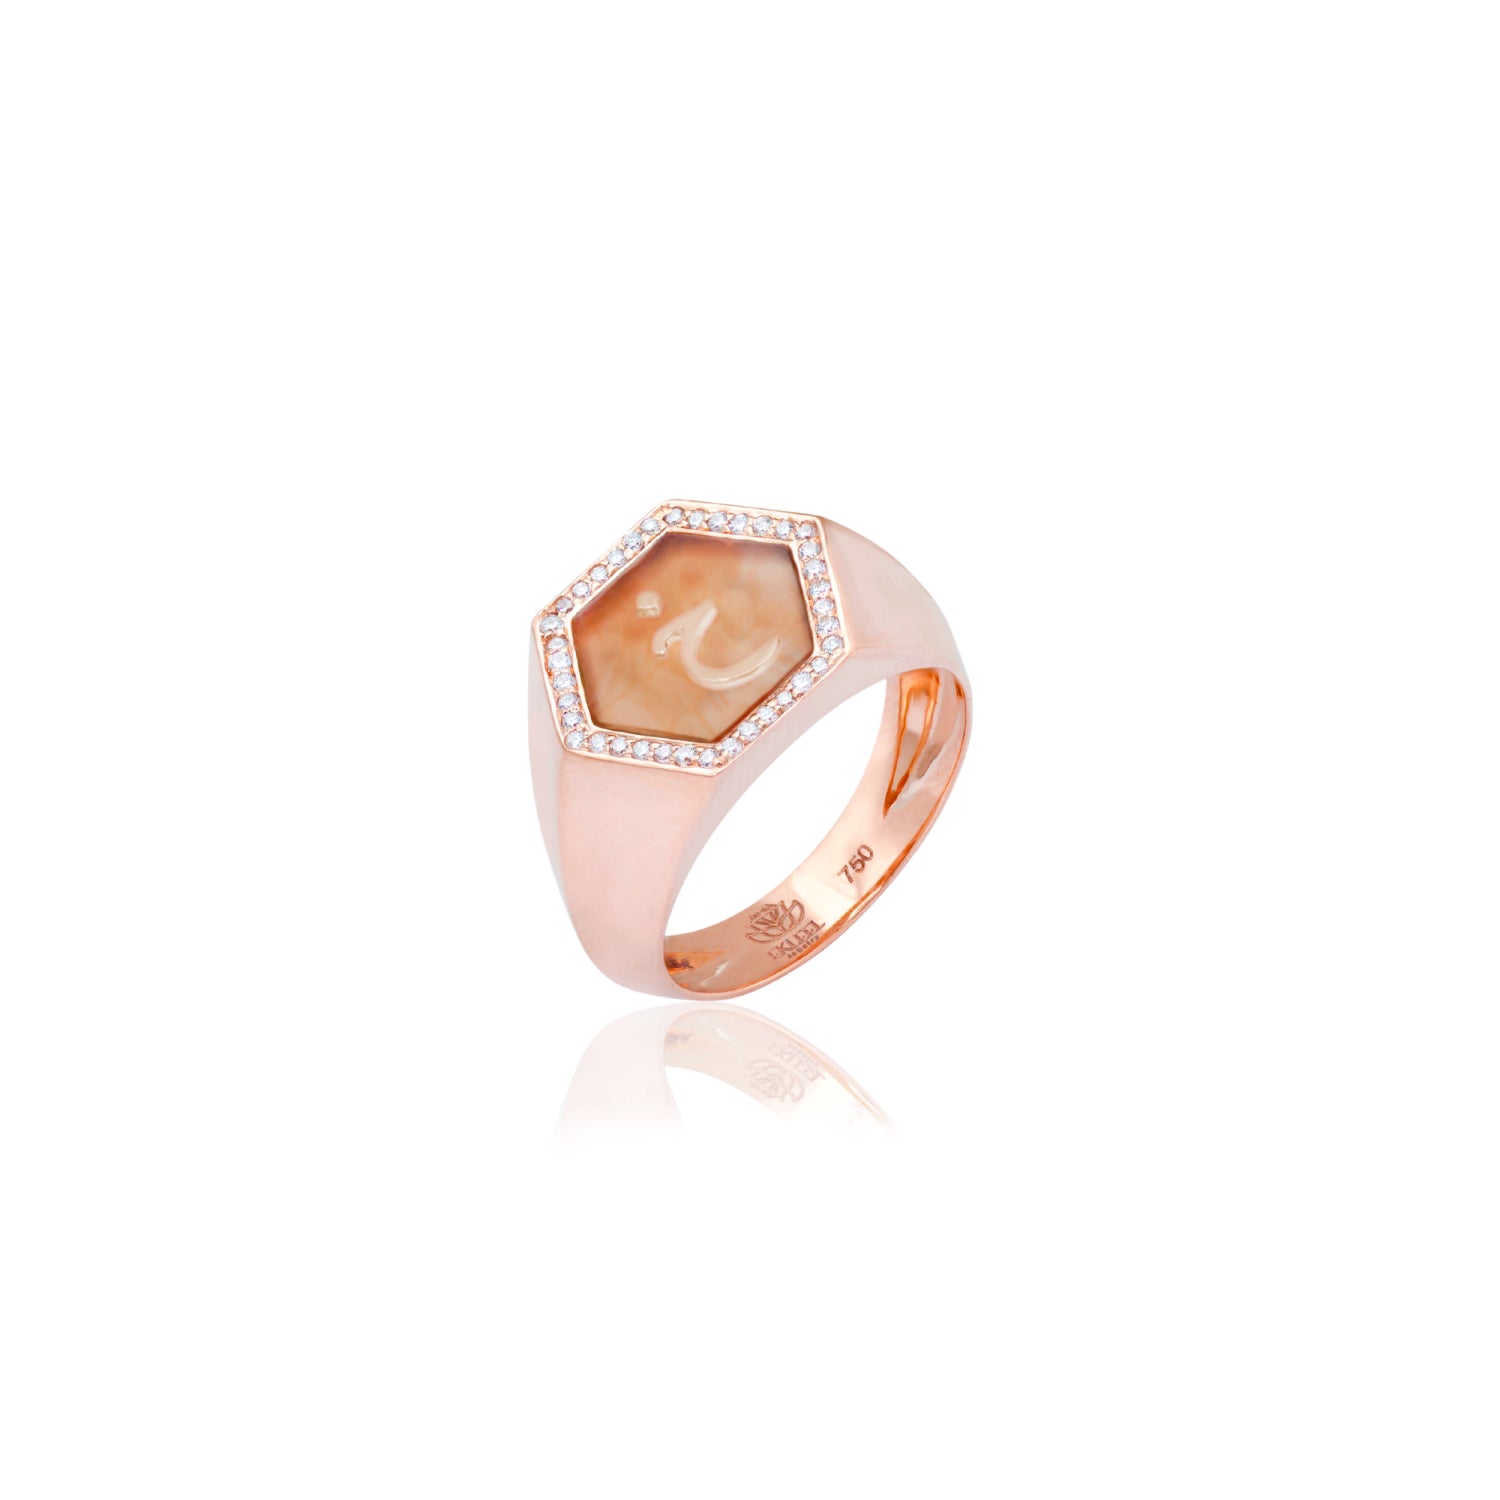 Qamoos 2.0 Letter خ Carnelian and Diamond Signet Ring in Rose Gold